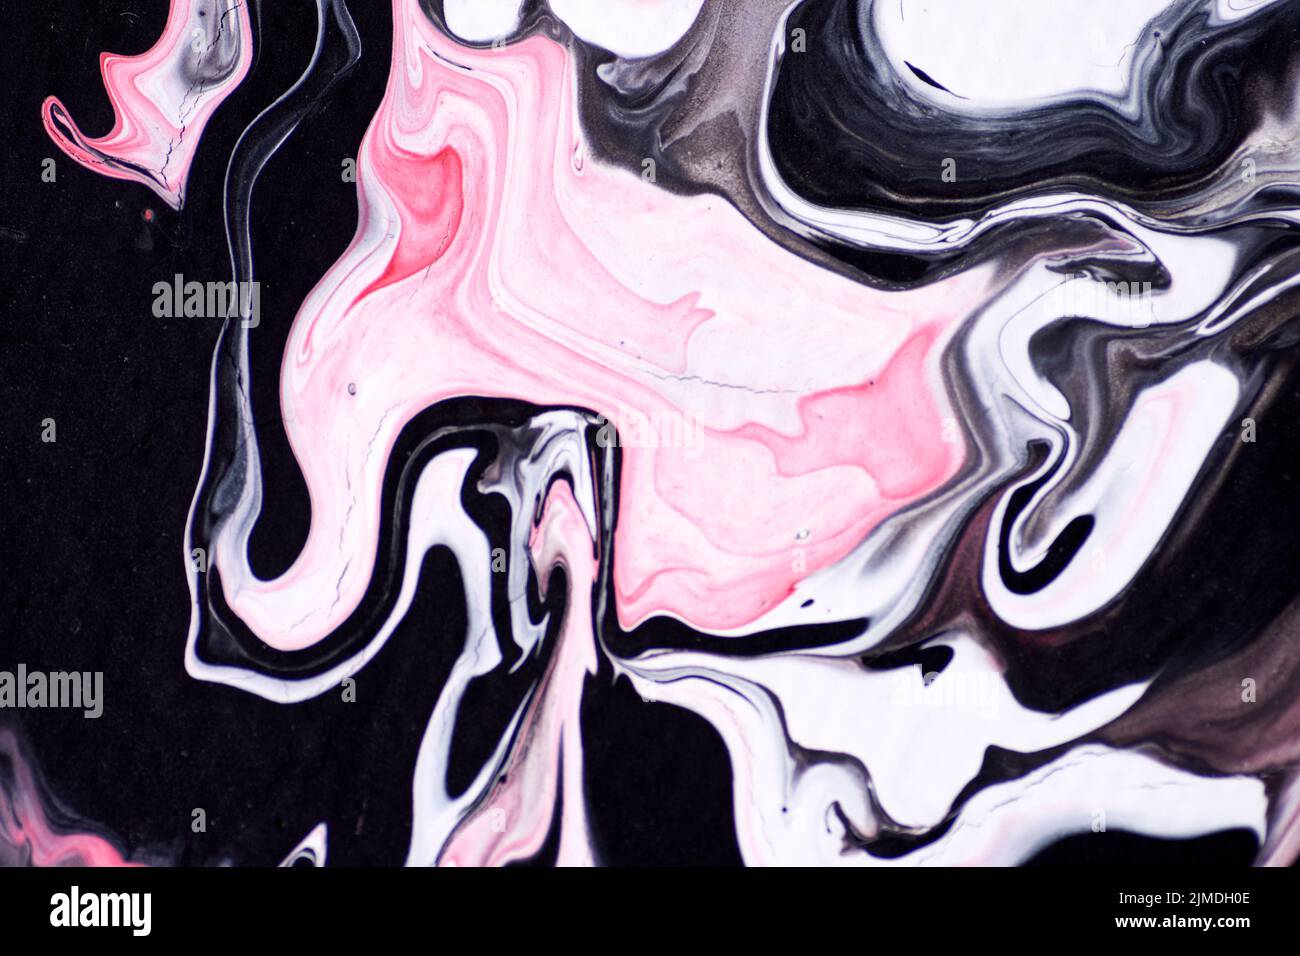 Marbled acrylic colored pattern in the colors red, black, white and pink. Stock Photo